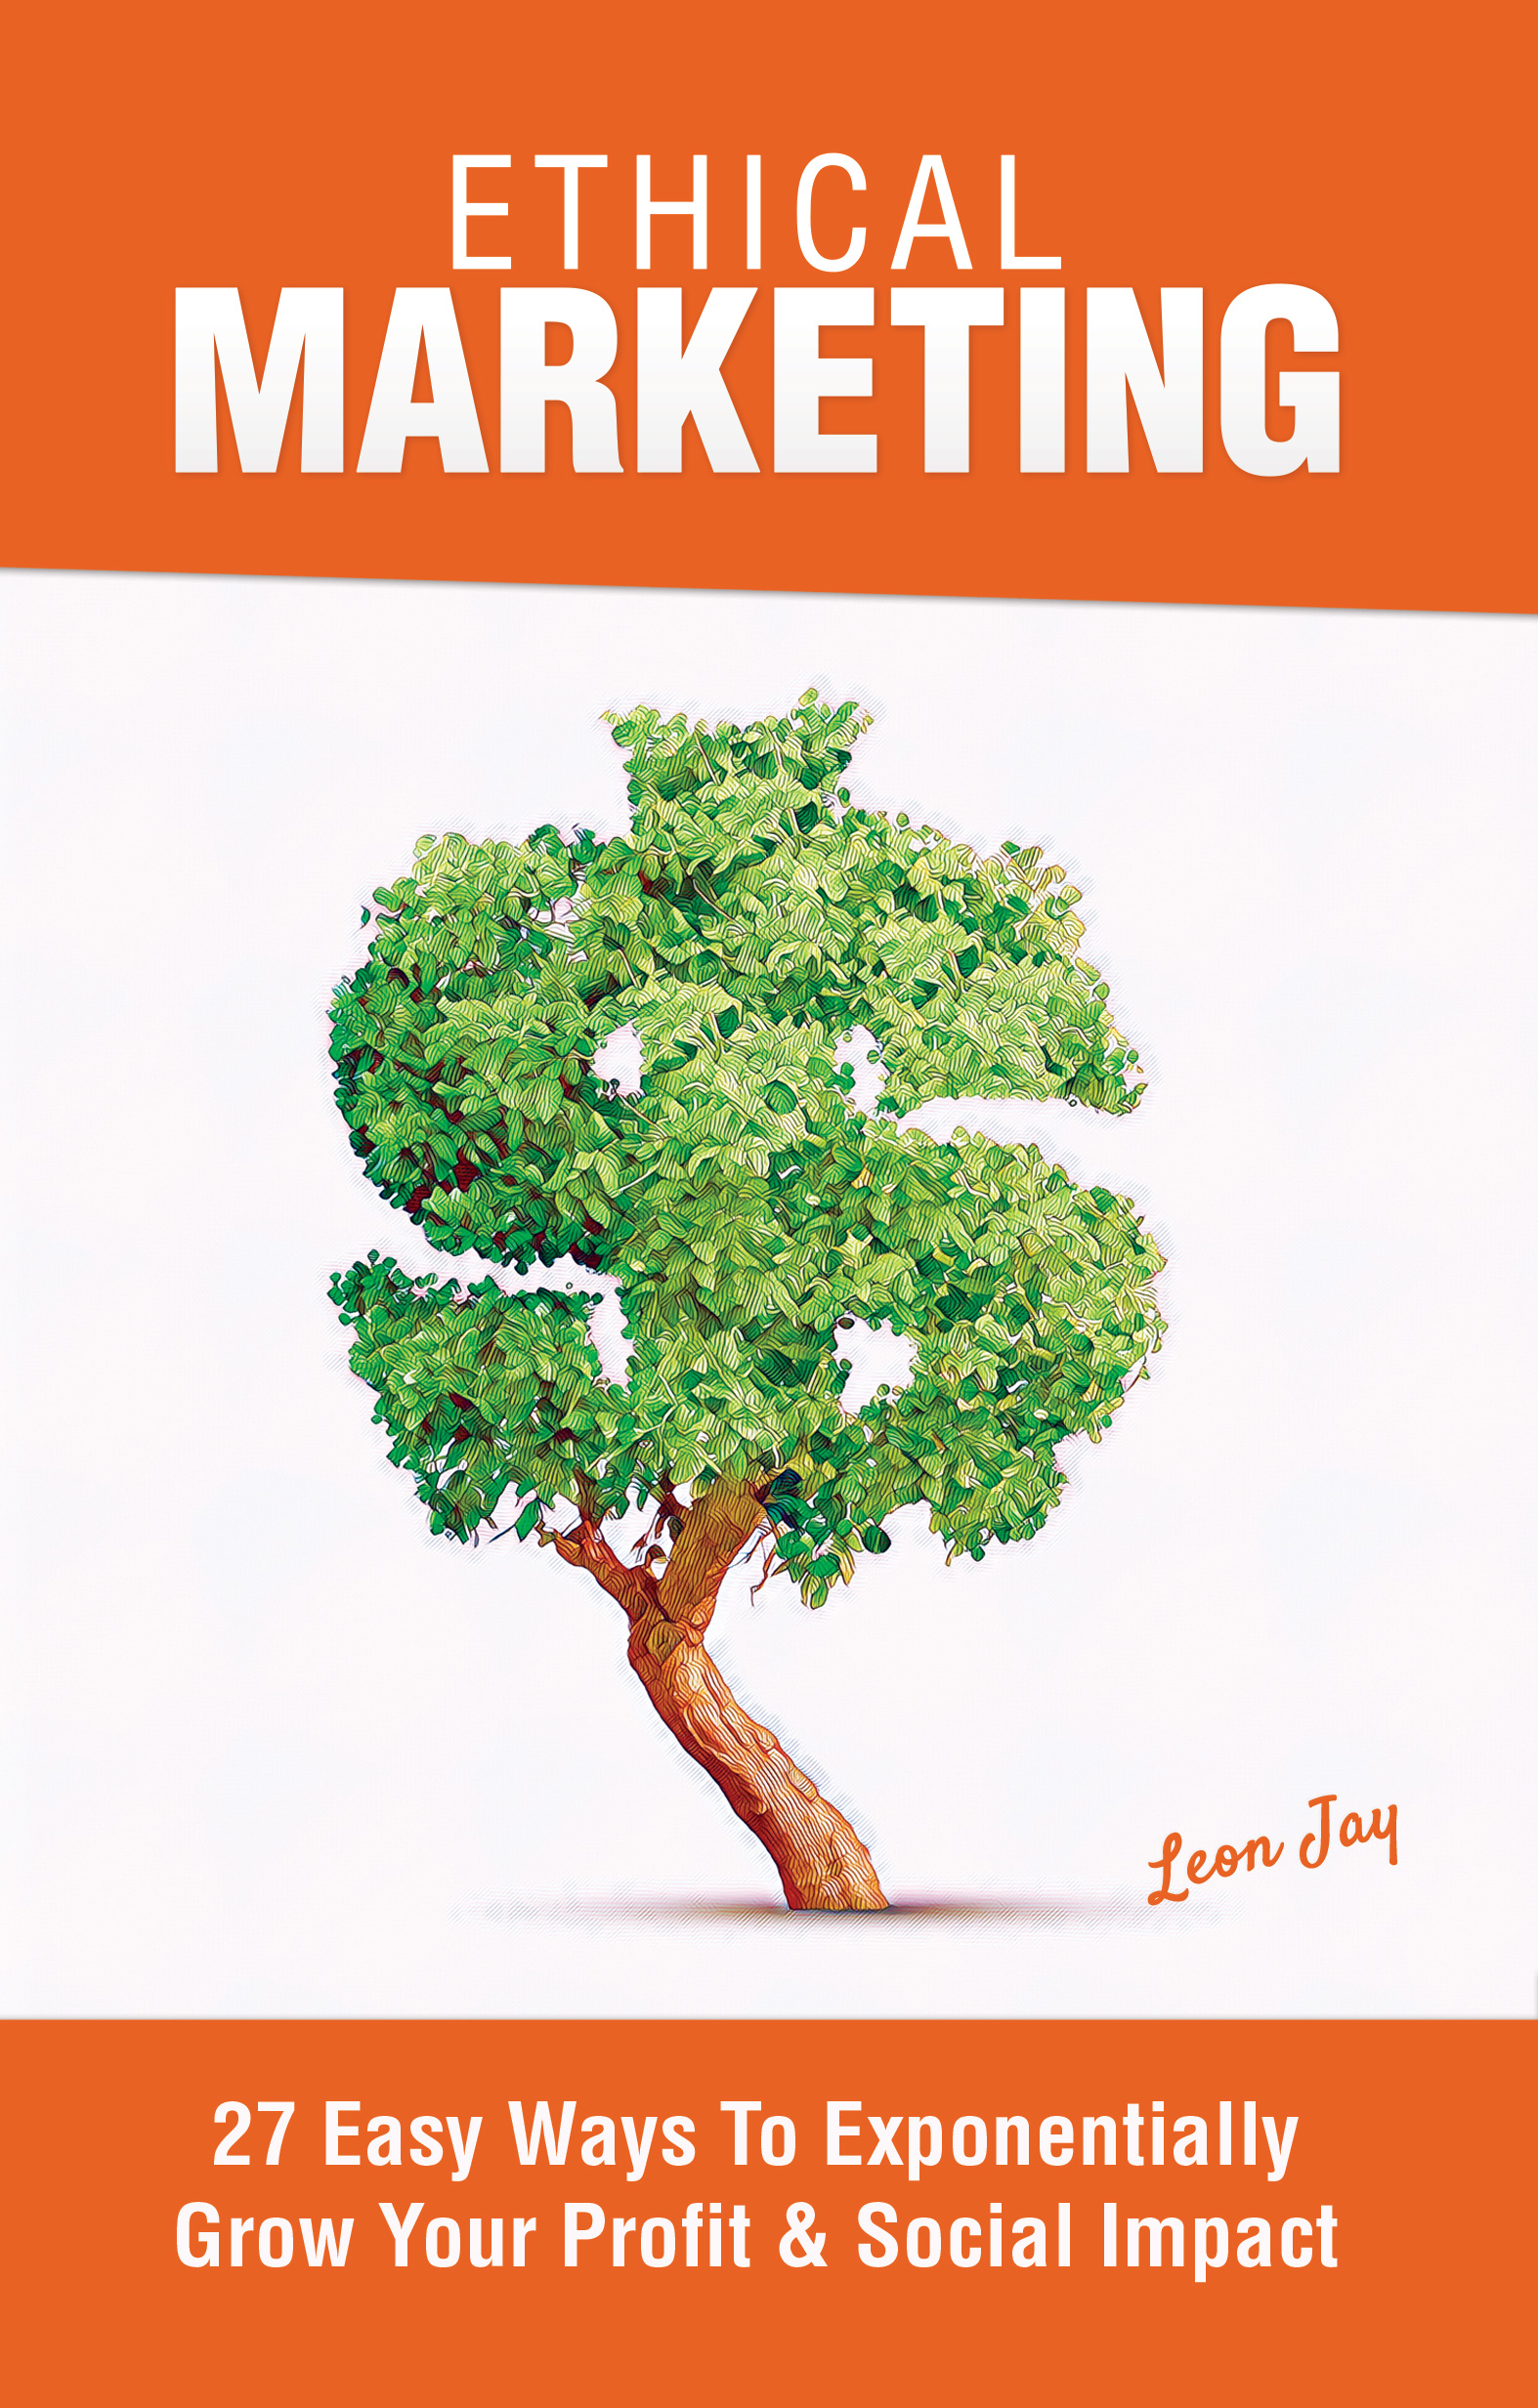 FREE: Ethical Marketing by Leon Jay